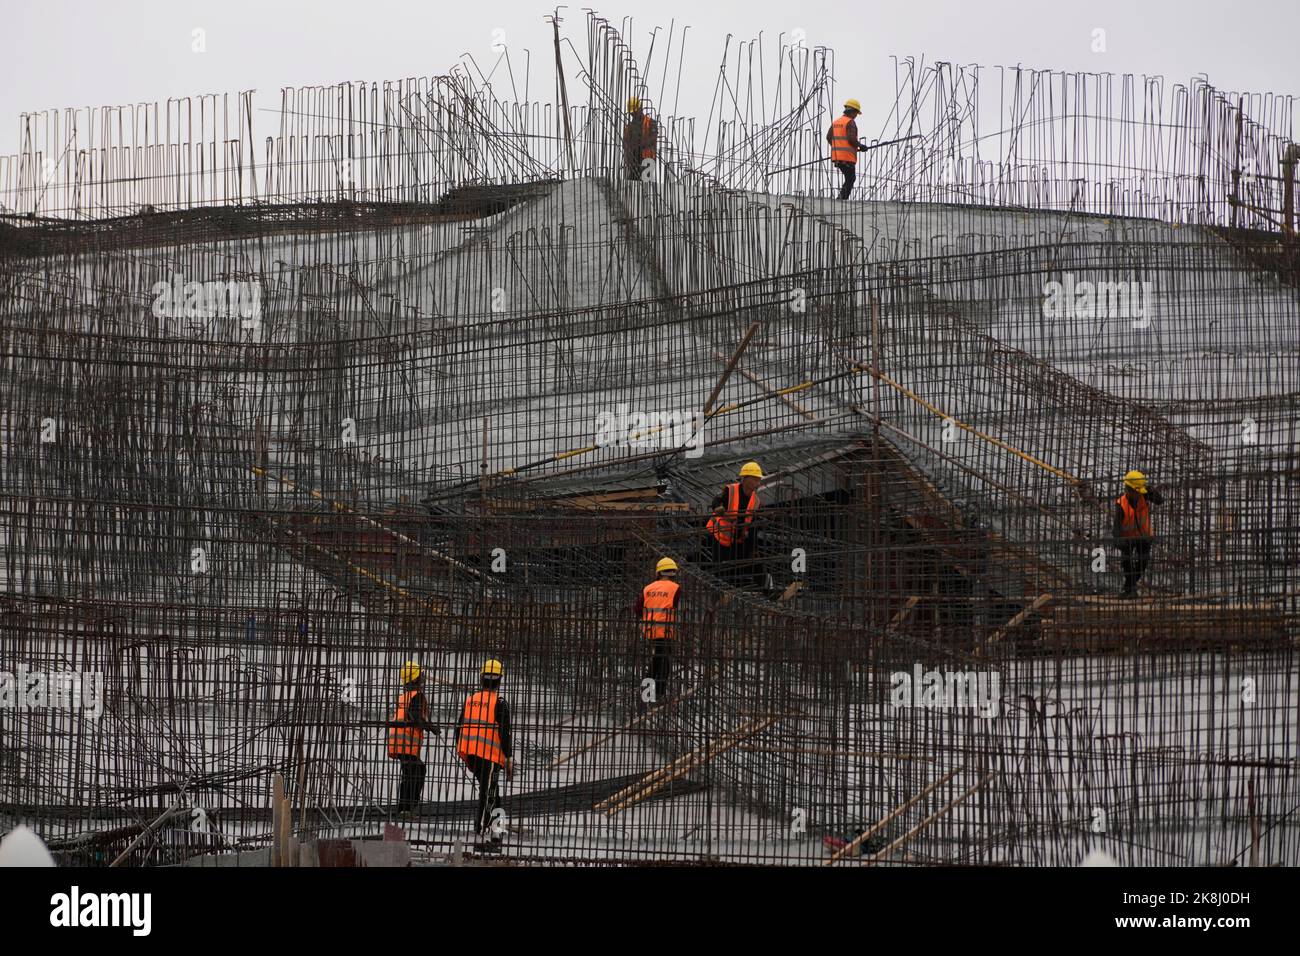 Workers work at a construction site, following the coronavirus disease (COVID-19) outbreak, in Shanghai, China, October 14, 2022. REUTERS/Aly Song Stock Photo